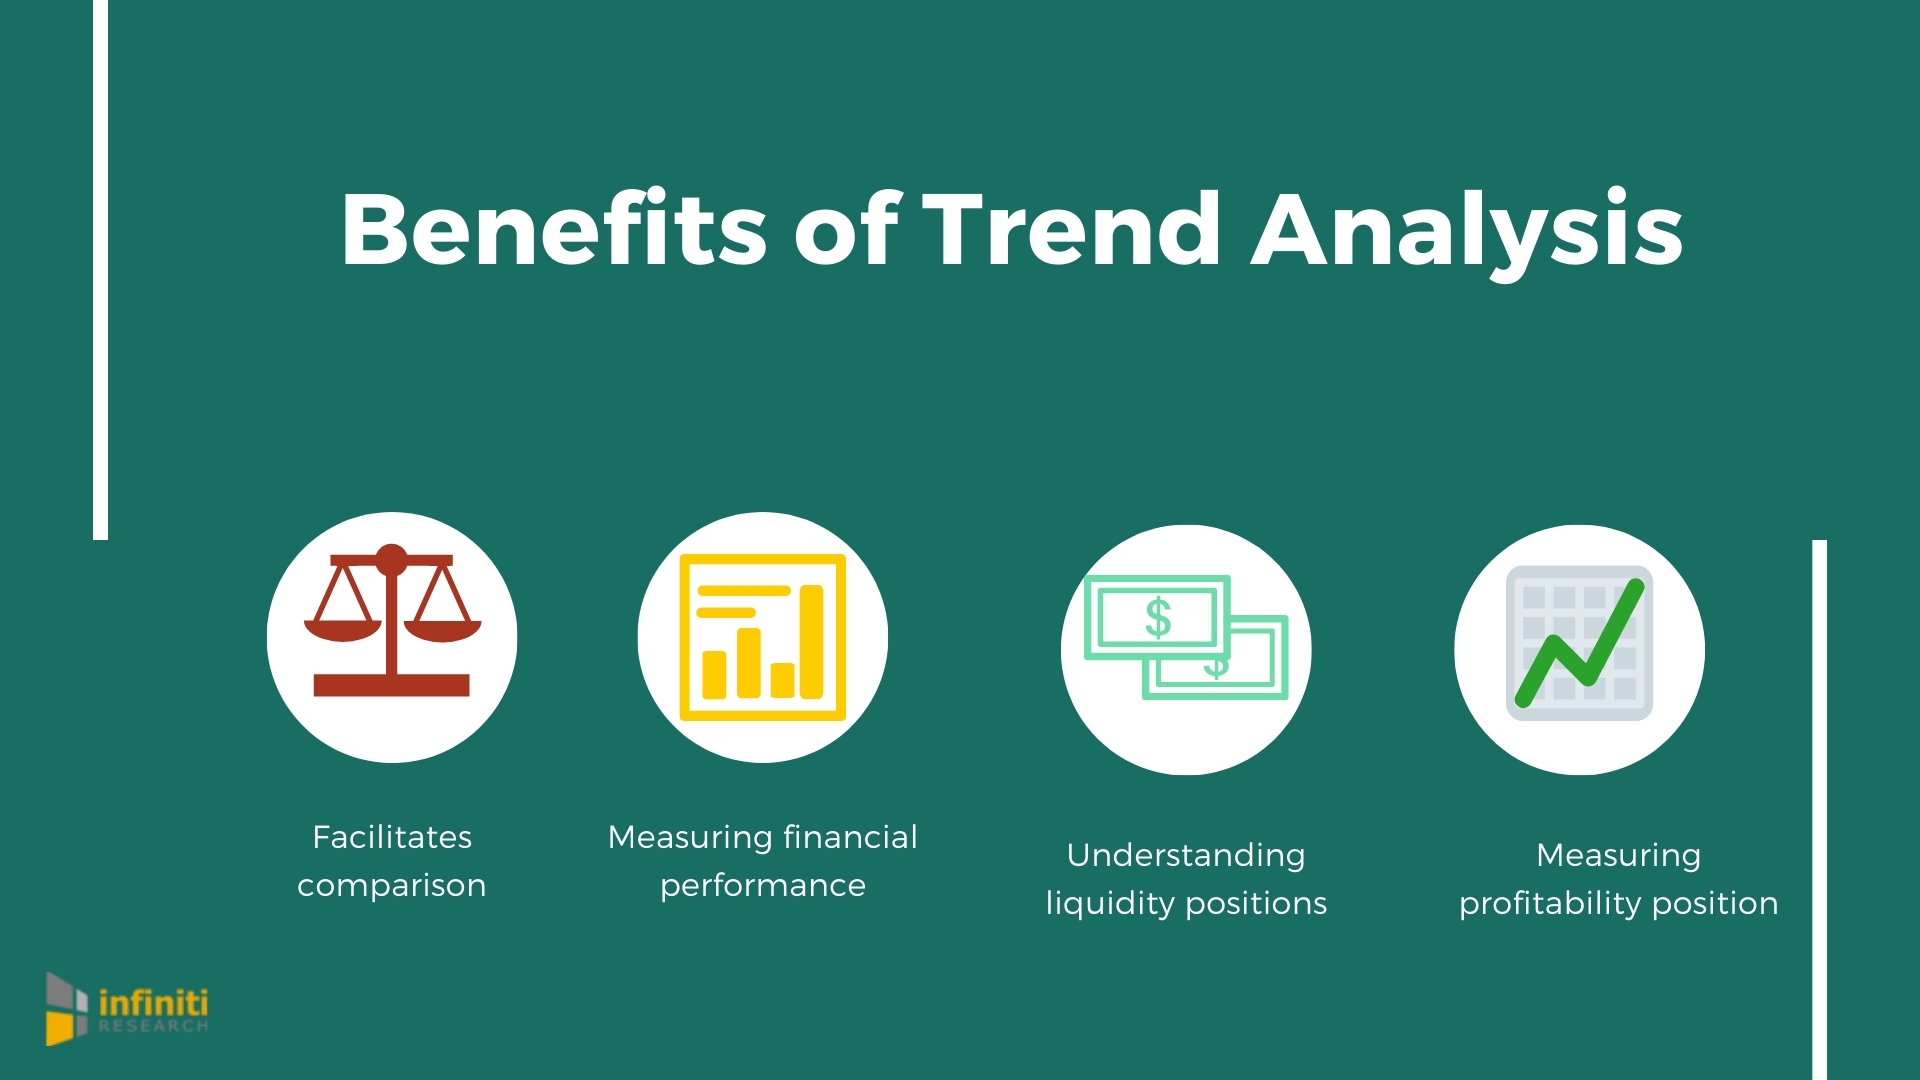 How Trend Analysis Can Help Your Business Better Analyze the Changing Market  Trends | Infiniti's Latest Blog Reveals | Business Wire